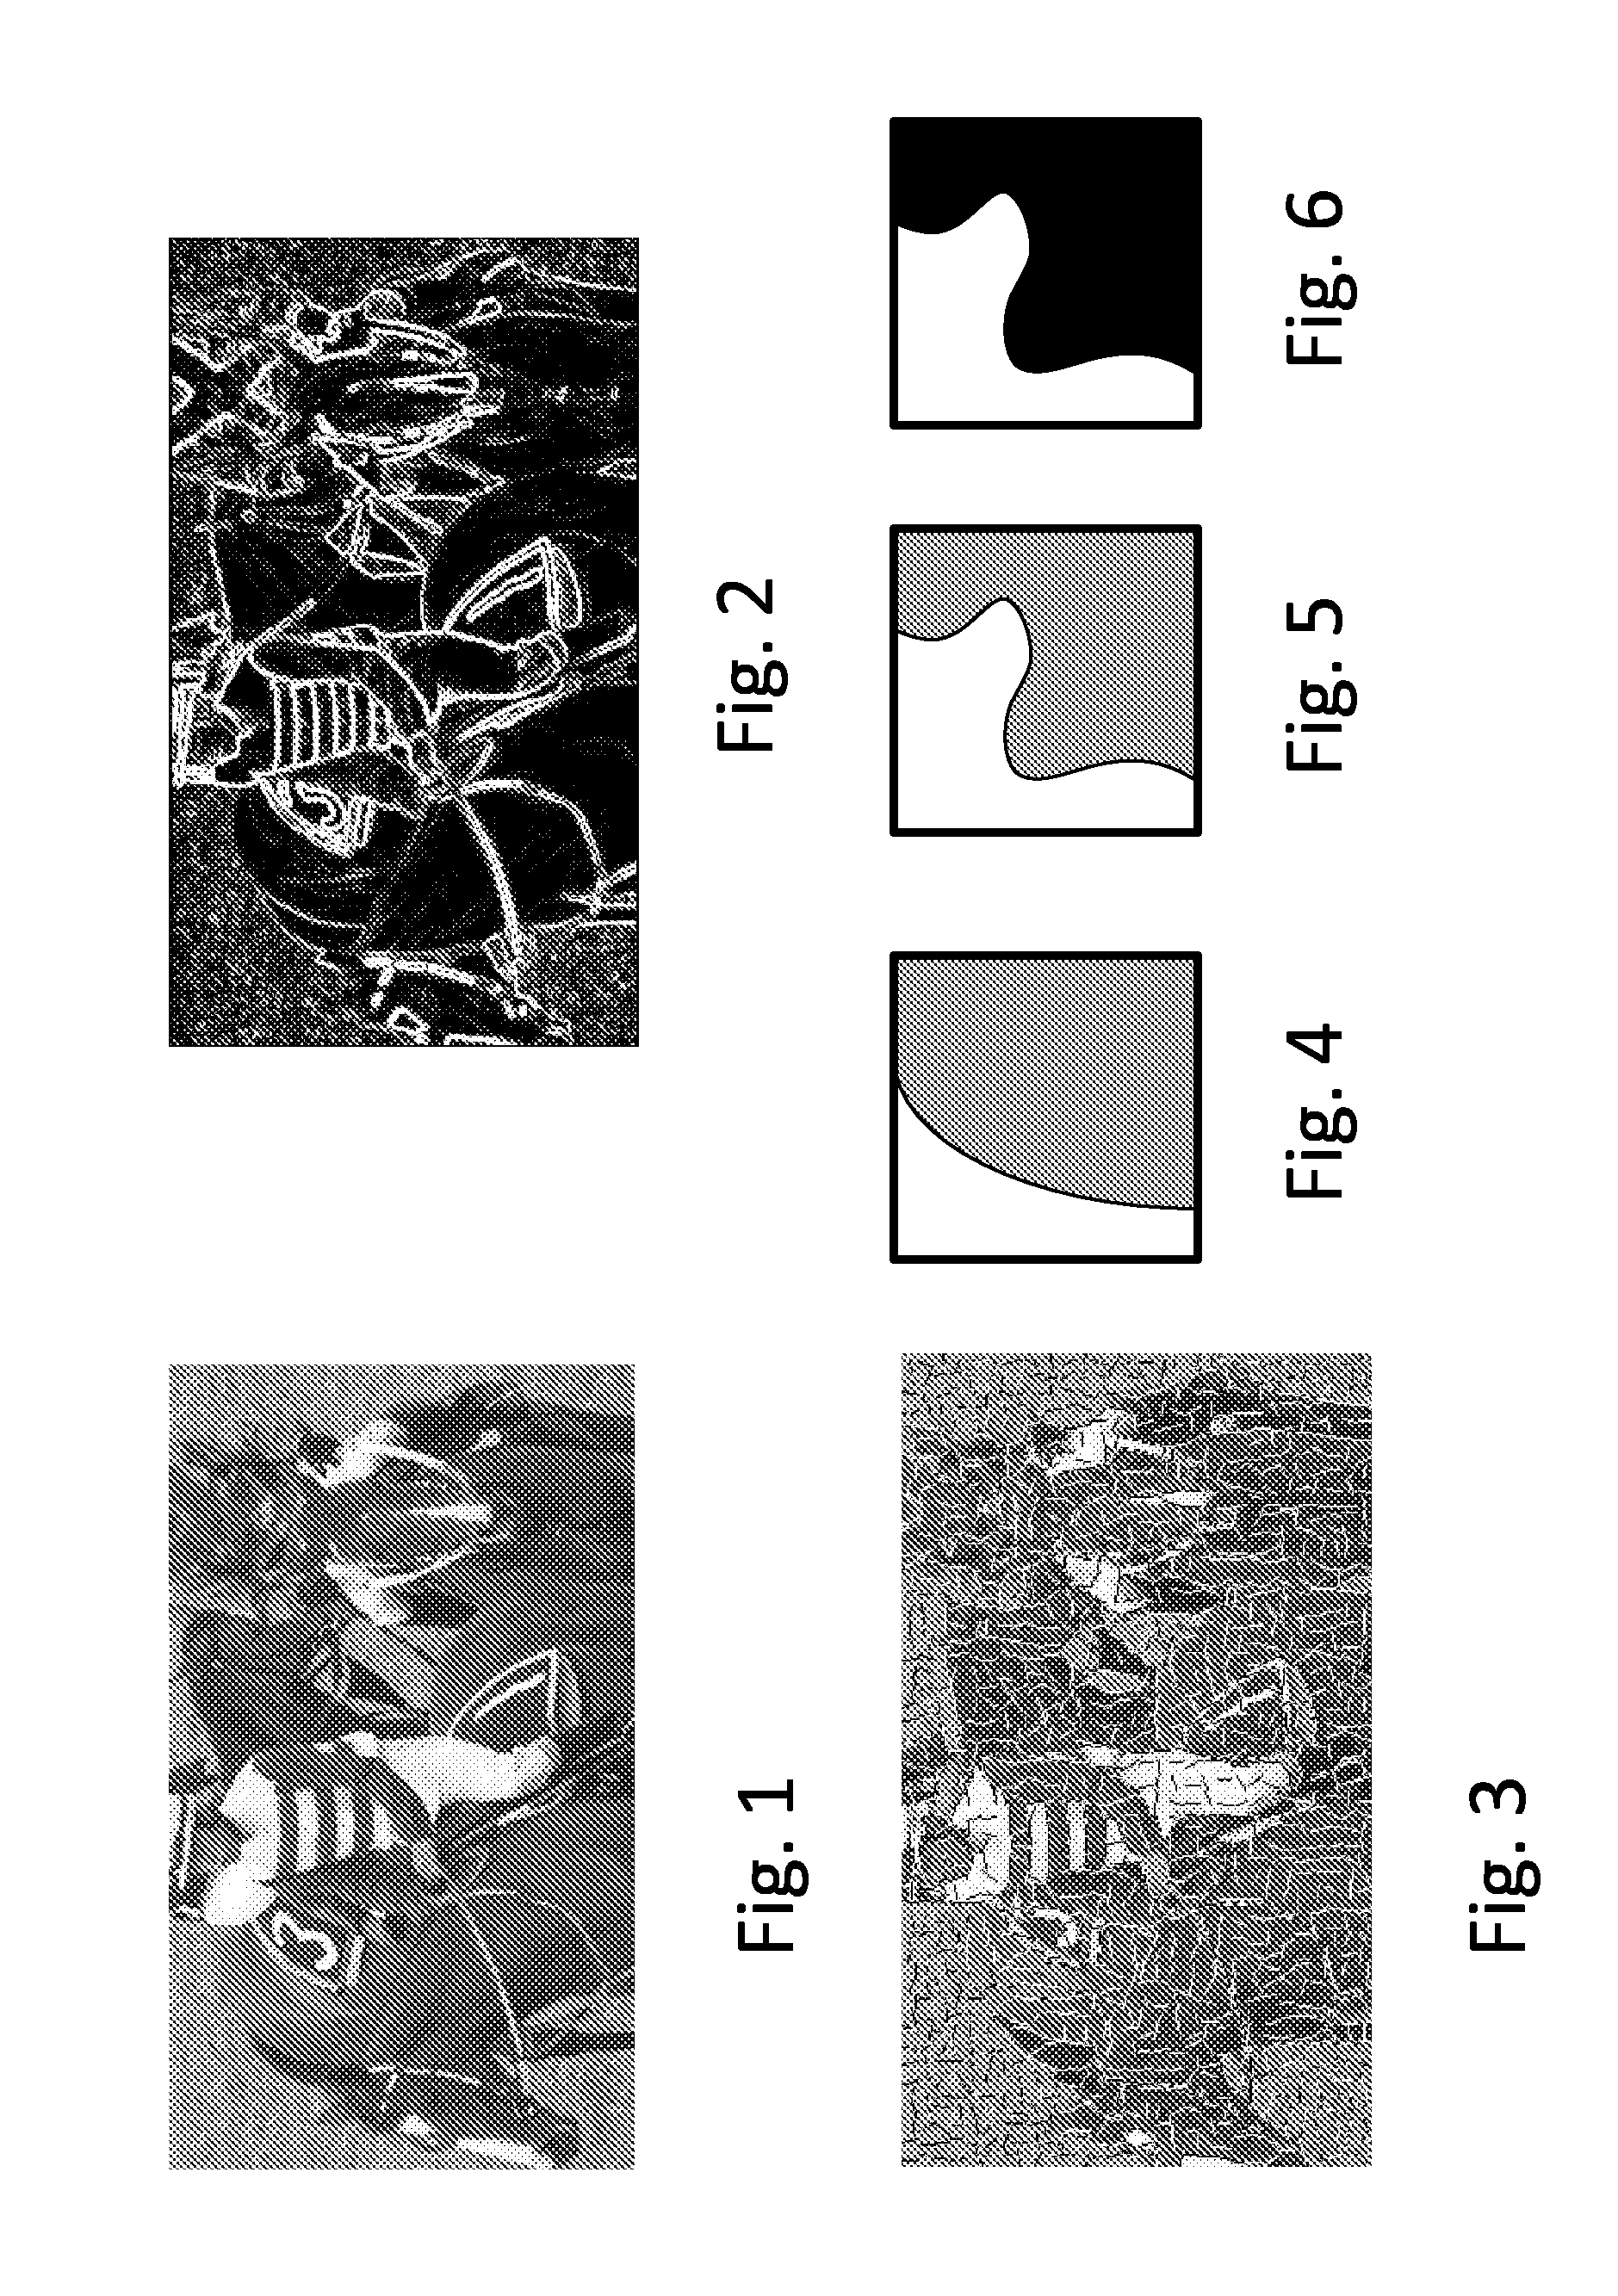 Method for reconstructing a current block of an image and corresponding encoding method, corresponding devices as well as storage medium carrying an images encoded in a bit stream